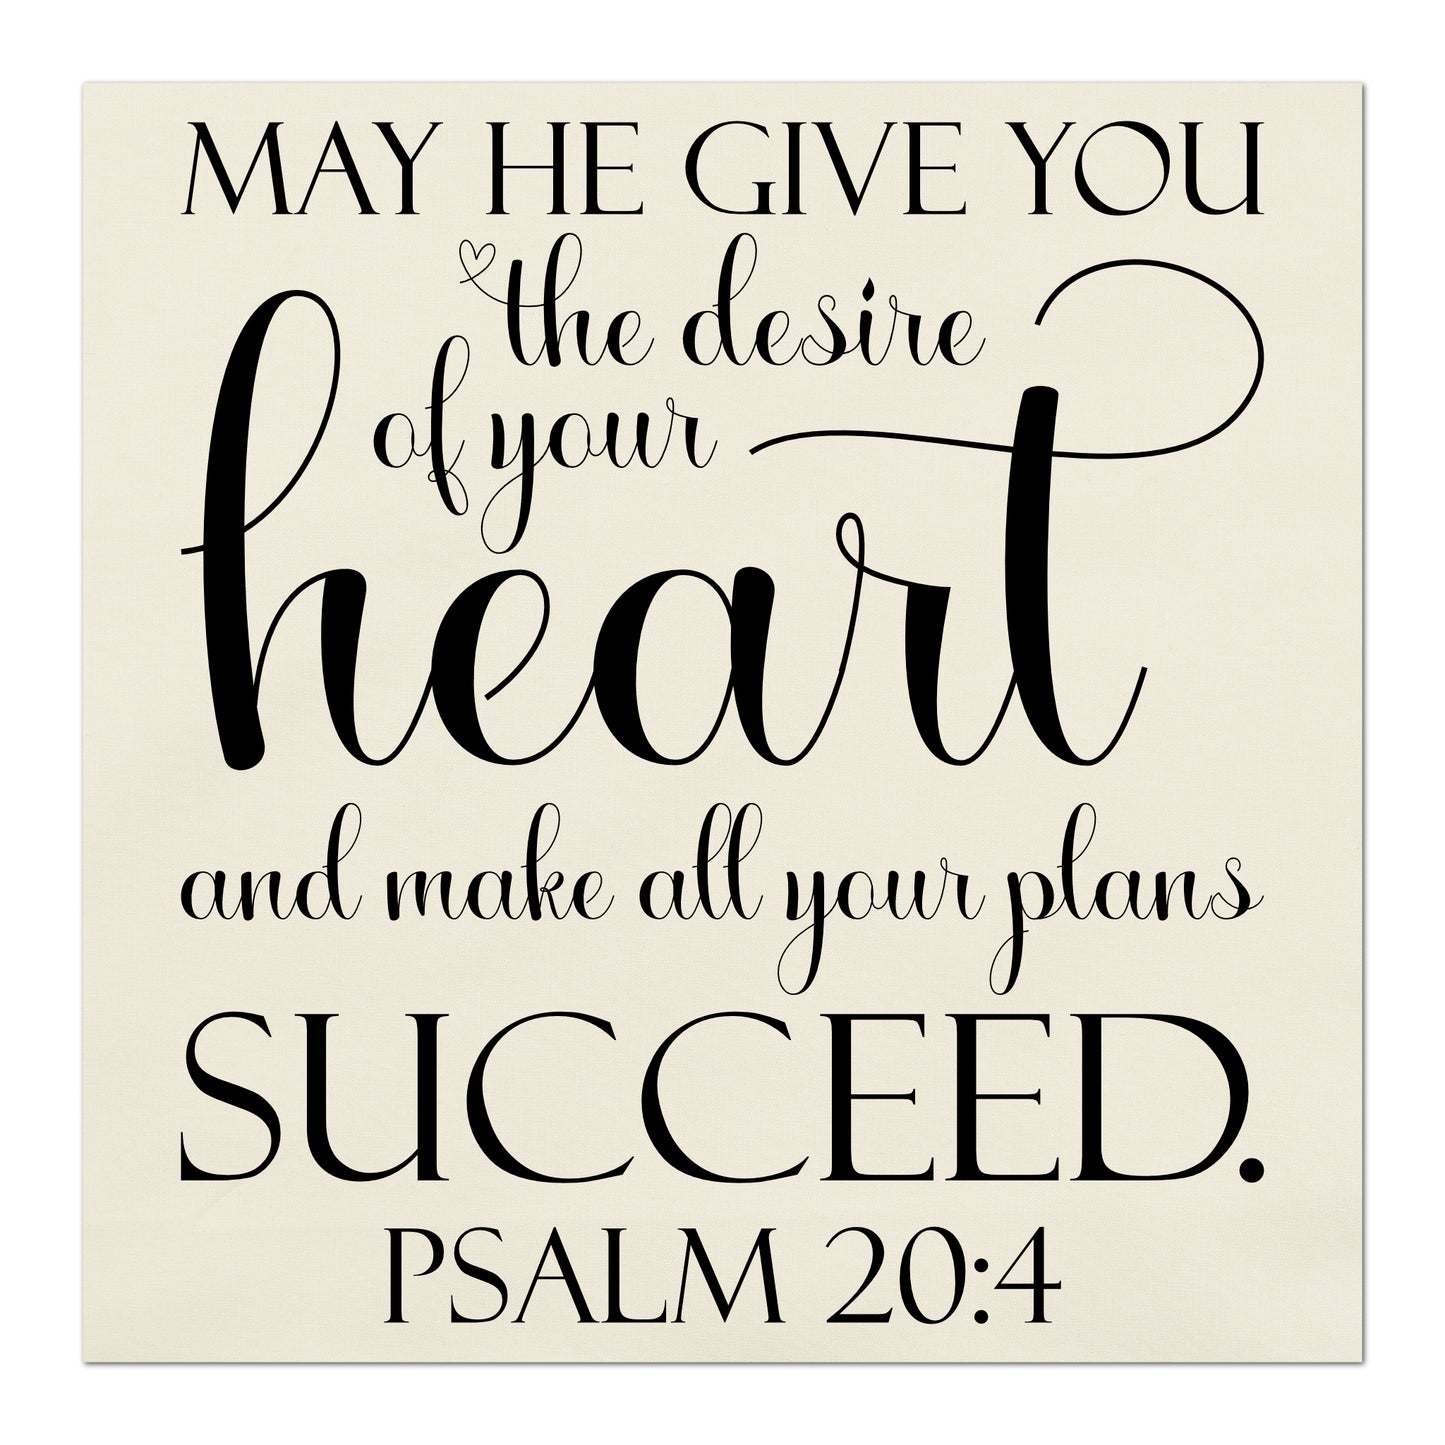 May He give you the desire of your heart and make all your plans succeed - Psalm 20:4 - Religious Fabric, Wall Hanging, Quilt Block, Sewing Craft, Pillow